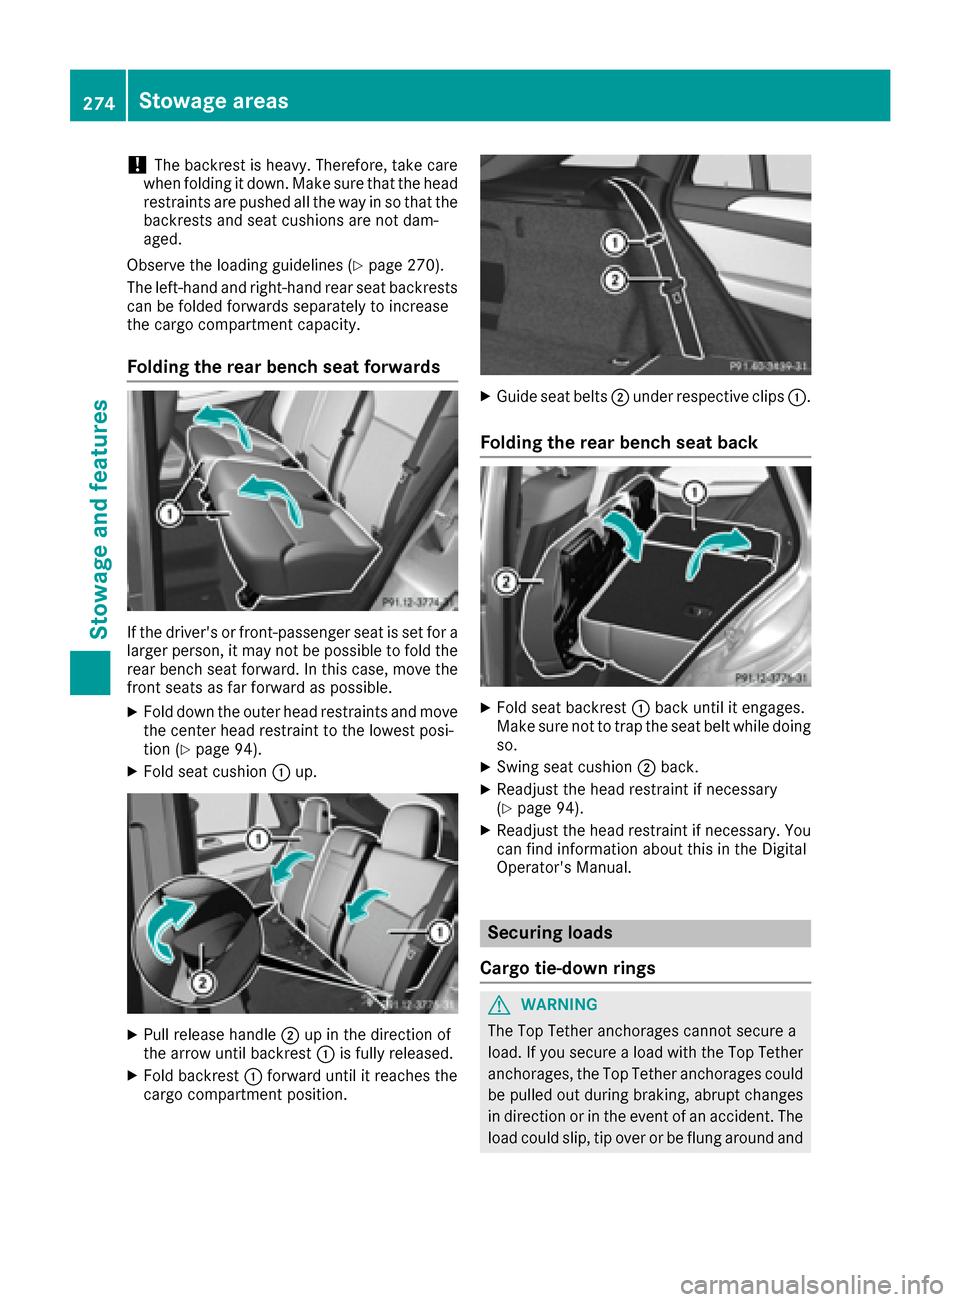 MERCEDES-BENZ GLE COUPE 2017 C292 Owners Manual !The backrest is heavy. Therefore, take care
when folding it down. Make sure that the head
restraints are pushed all the way in so that the backrests and seat cushions are not dam-
aged.
Observe the l